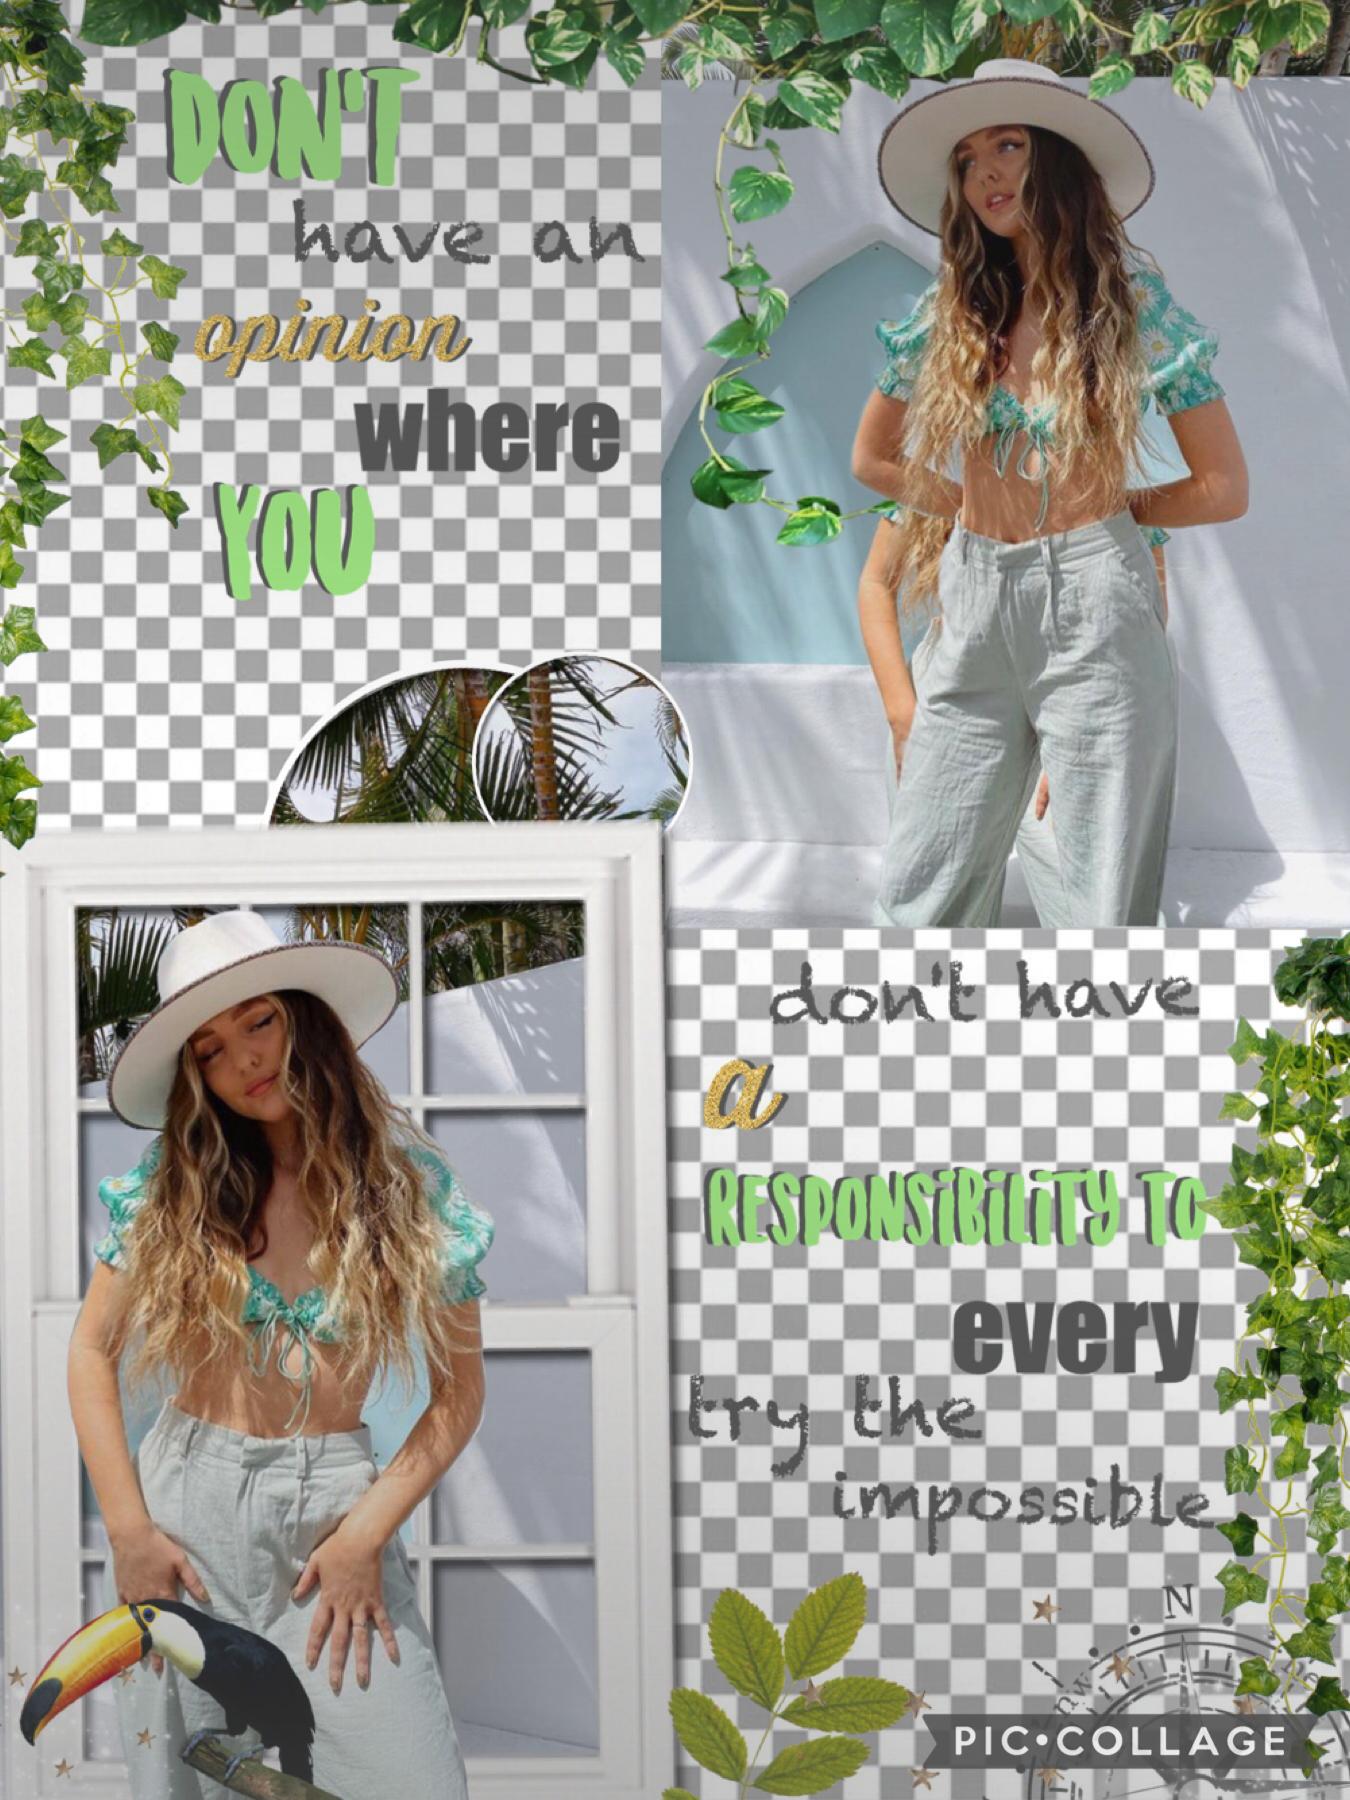 🌿Tap🌿
This is inspired by the stunning clear blue water, I'm going to be posting more of these kind of collage layouts within my next few posts! Shoutout to Sage- she is too sweet, all of you are too sweet!! I'm finally on Summer vacation! How exited are 